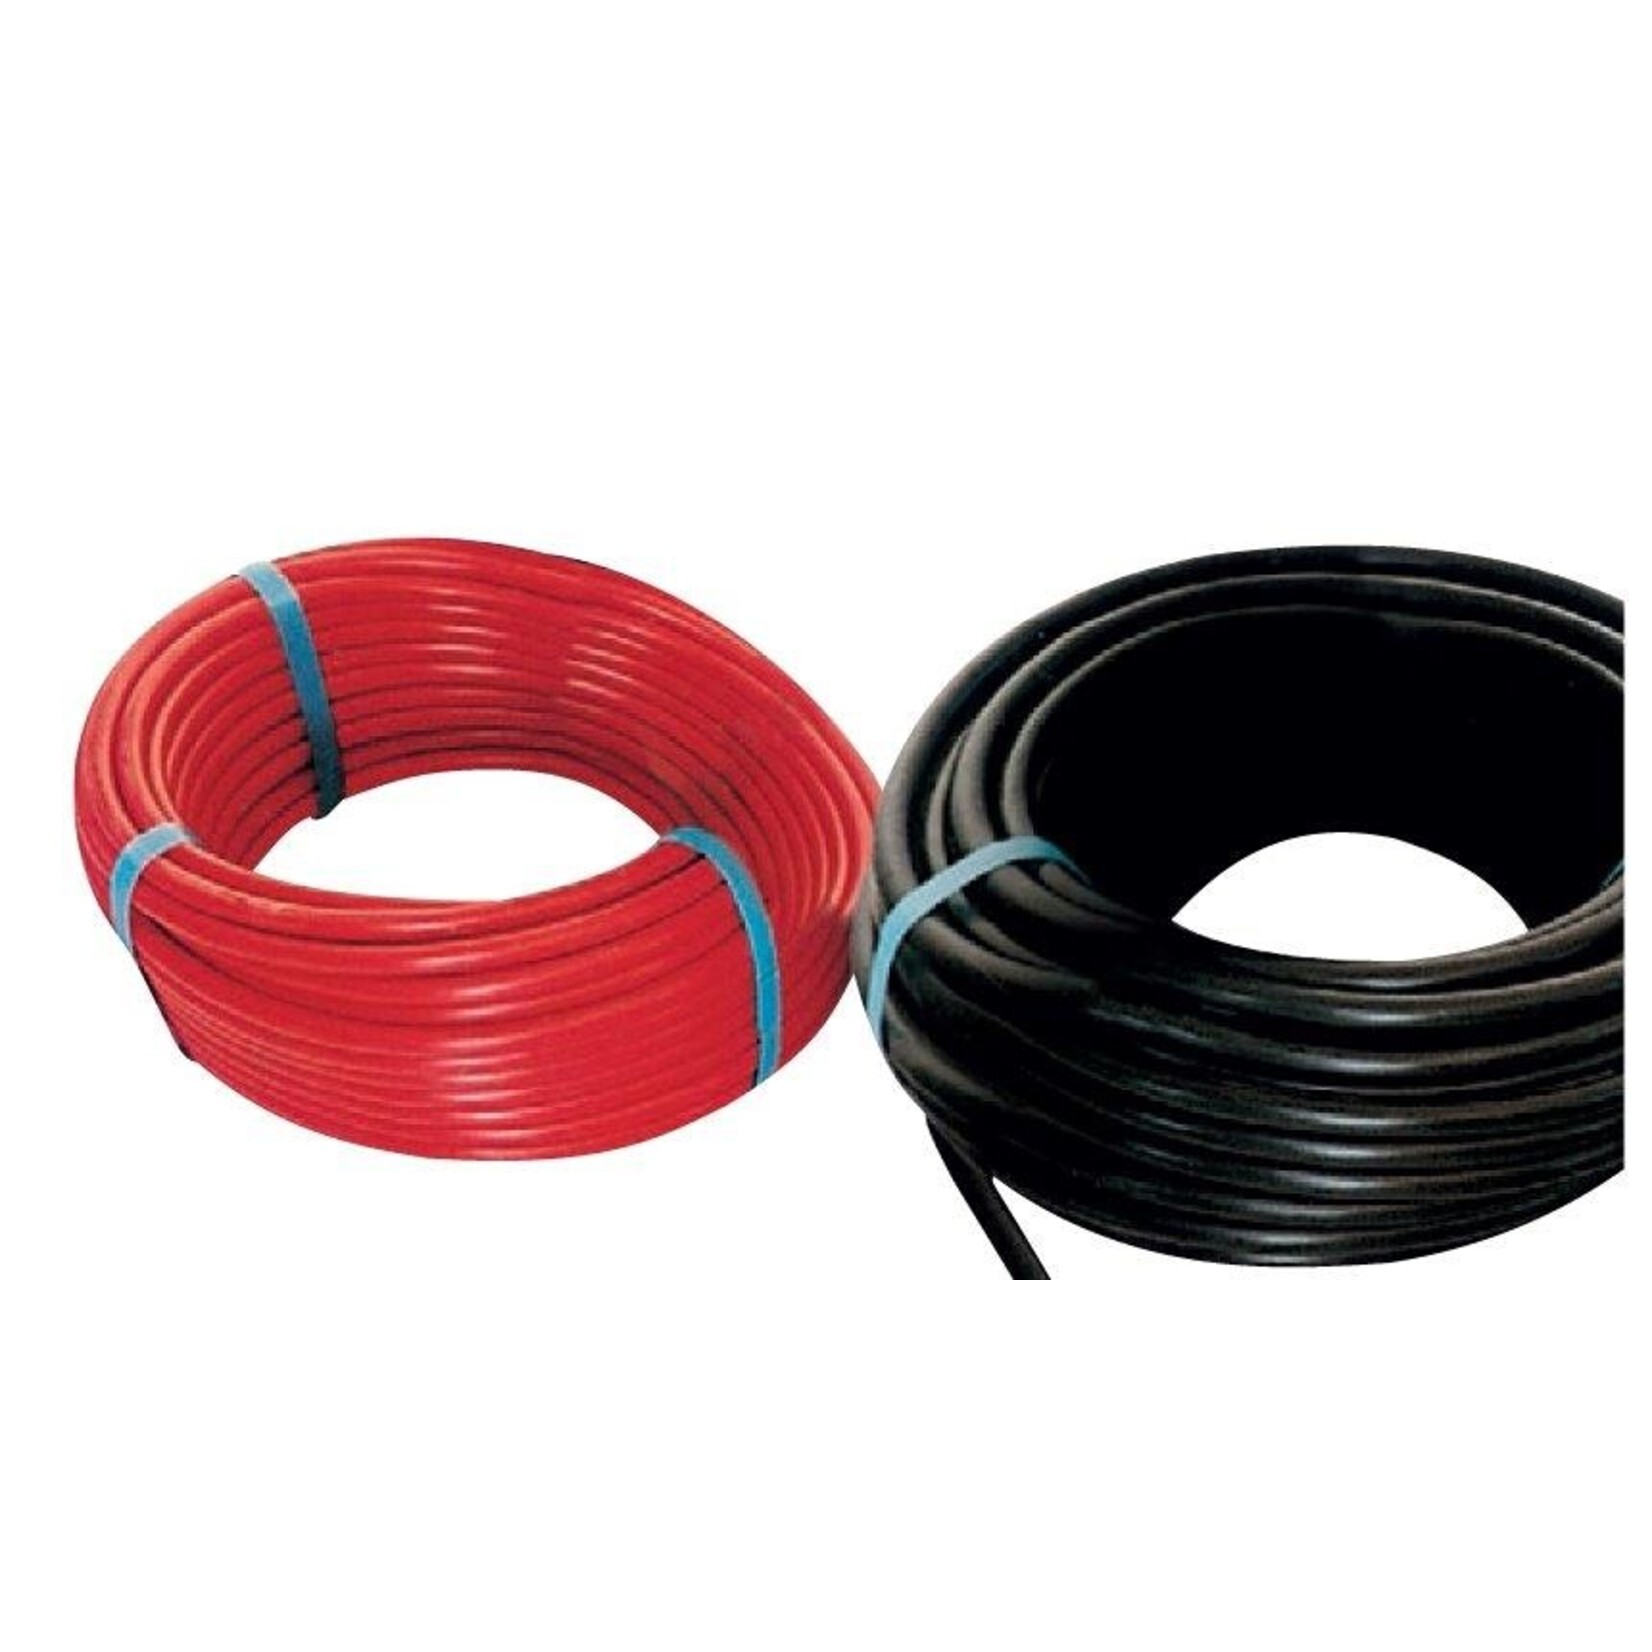 Plastimo Cable 16mm2 red 24tth 25m